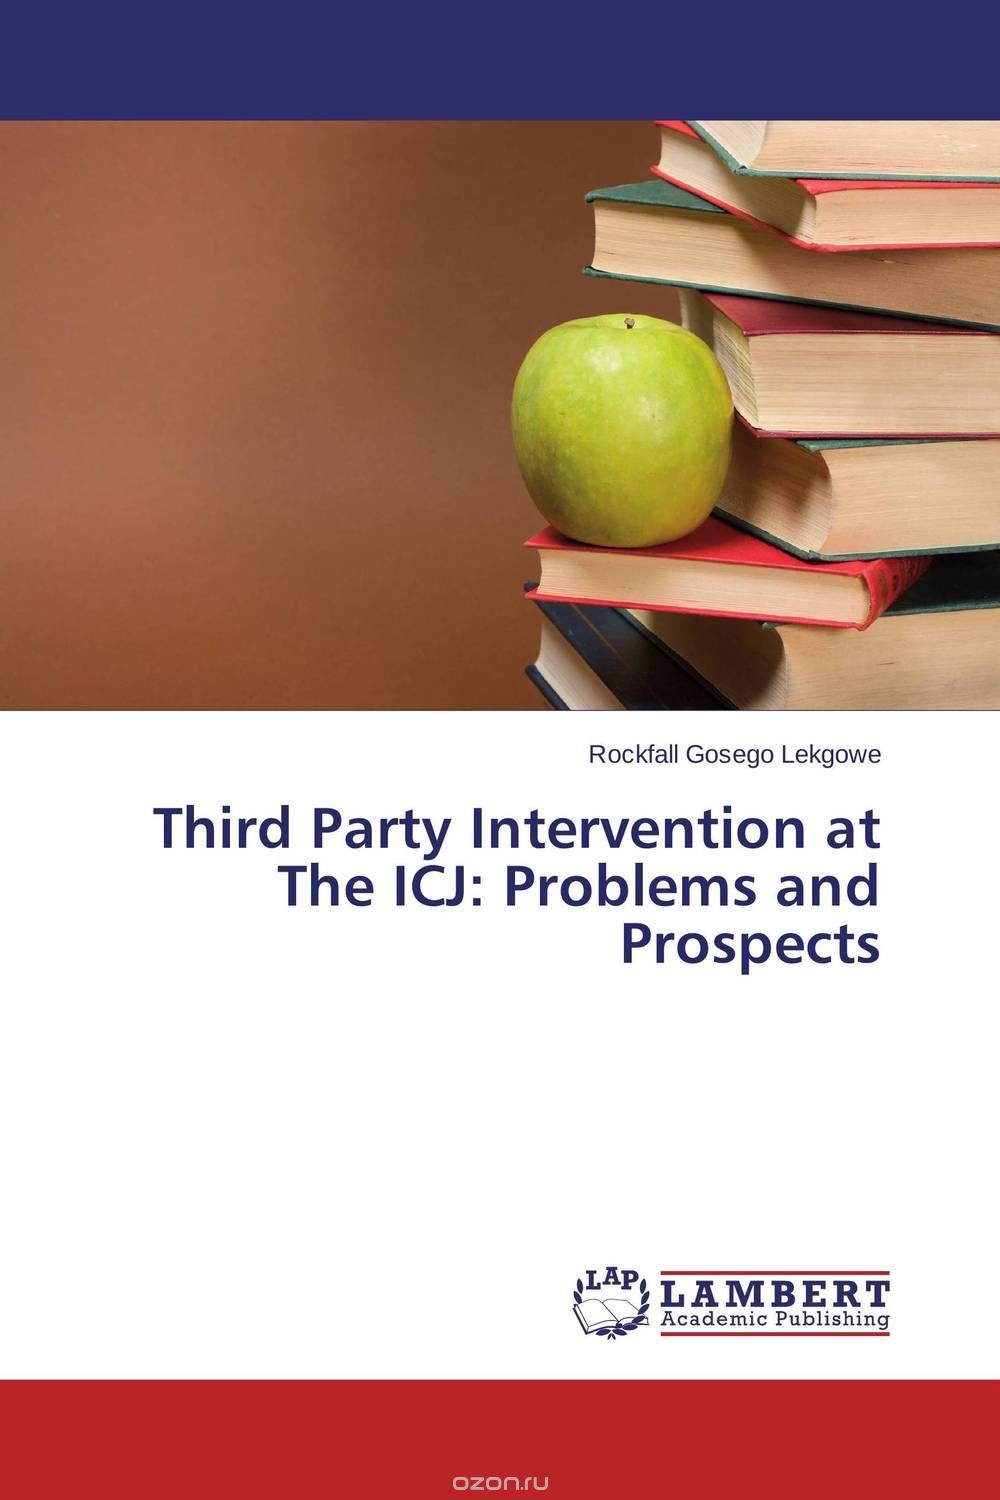 Скачать книгу "Third Party Intervention at The ICJ: Problems and Prospects"